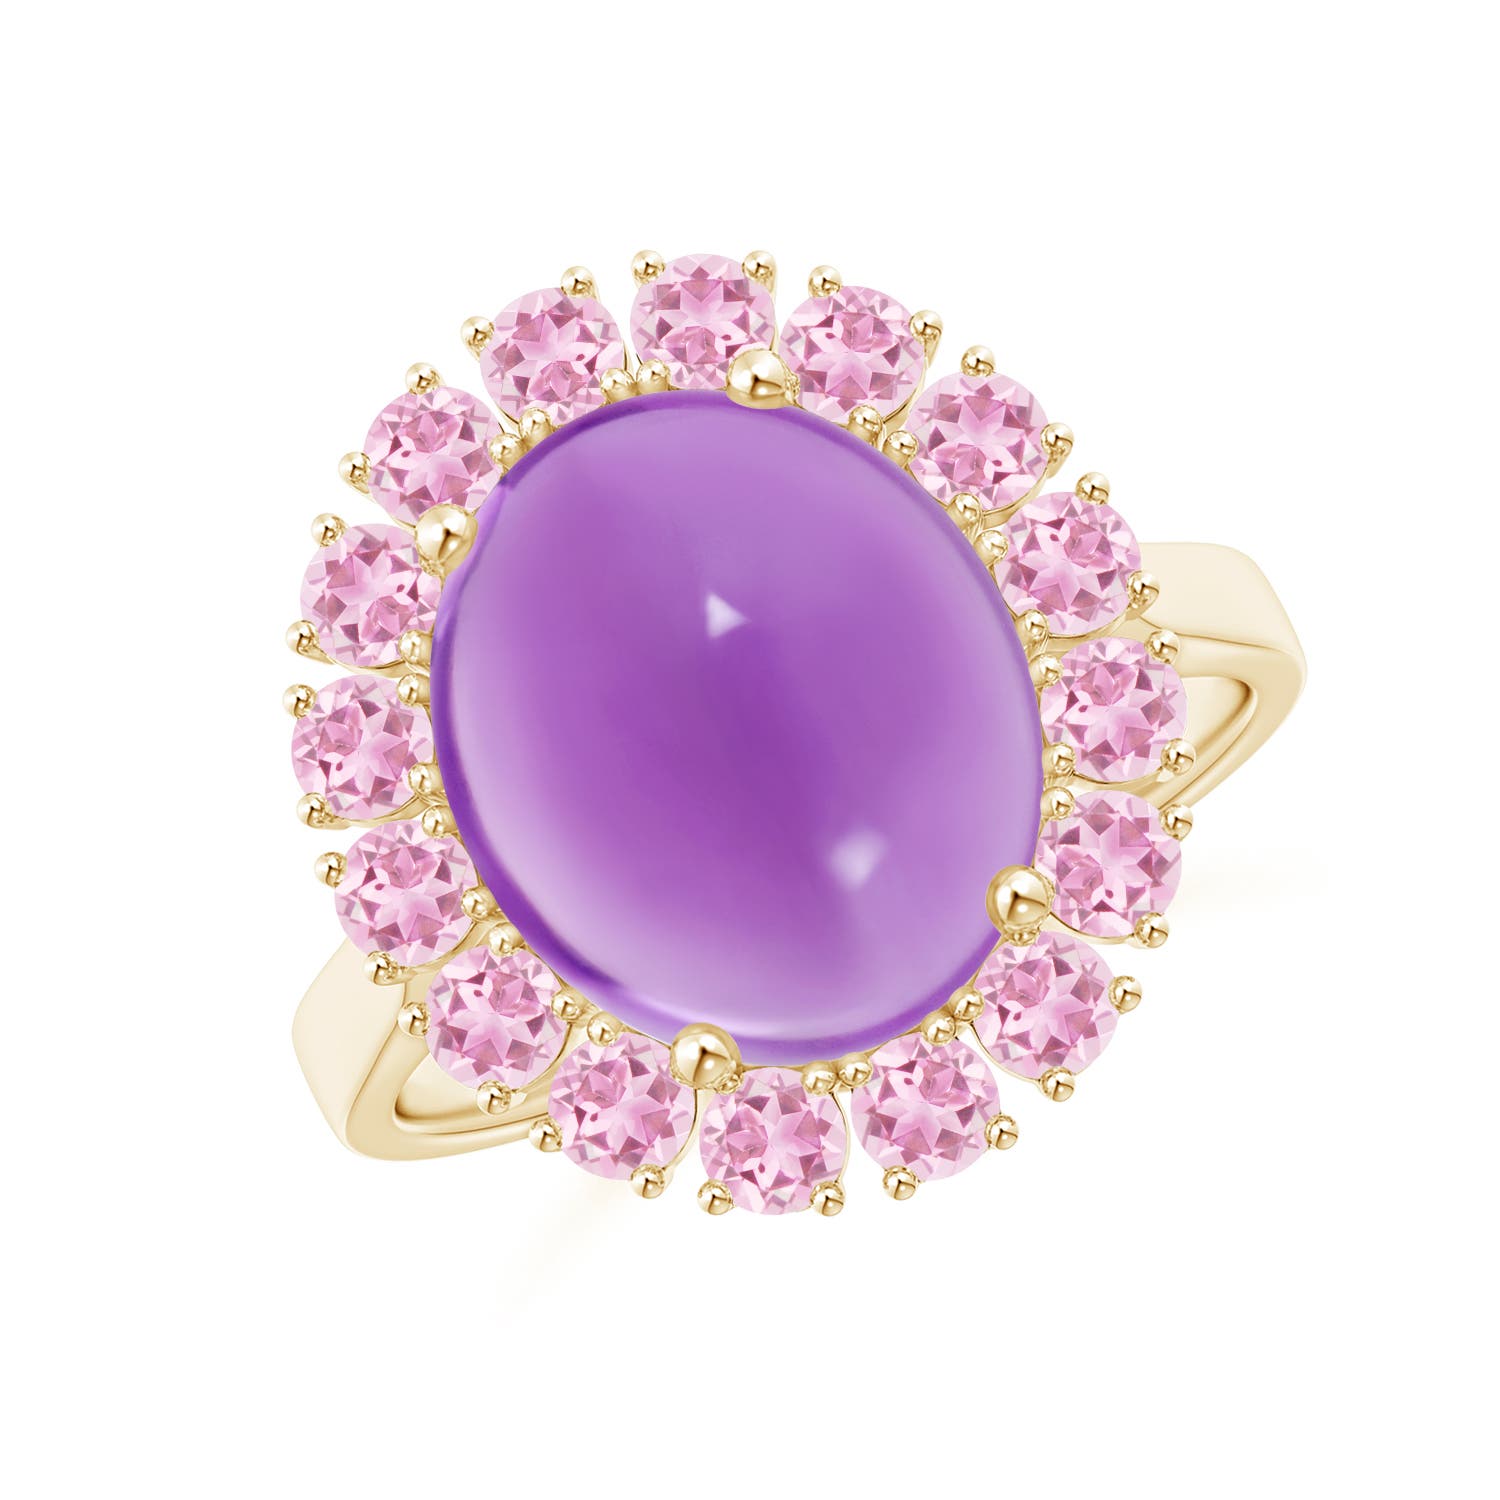 A - Amethyst / 7.26 CT / 14 KT Yellow Gold